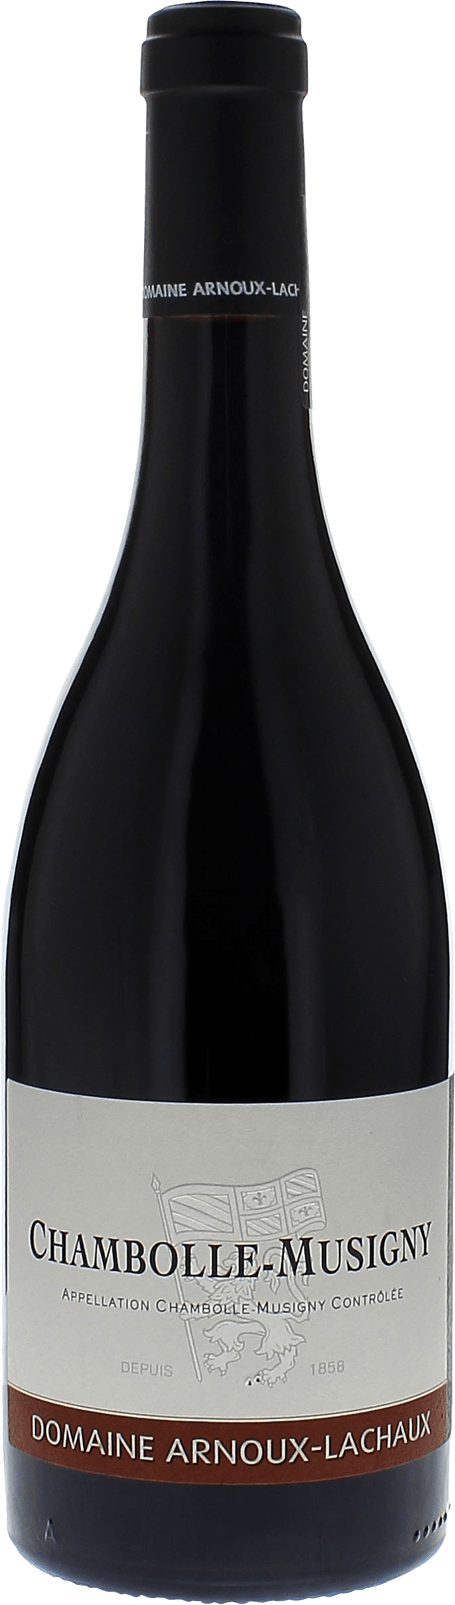 Chambolle musigny 2016 Domaine ARNOUX - LACHAUX, Bourgogne rouge